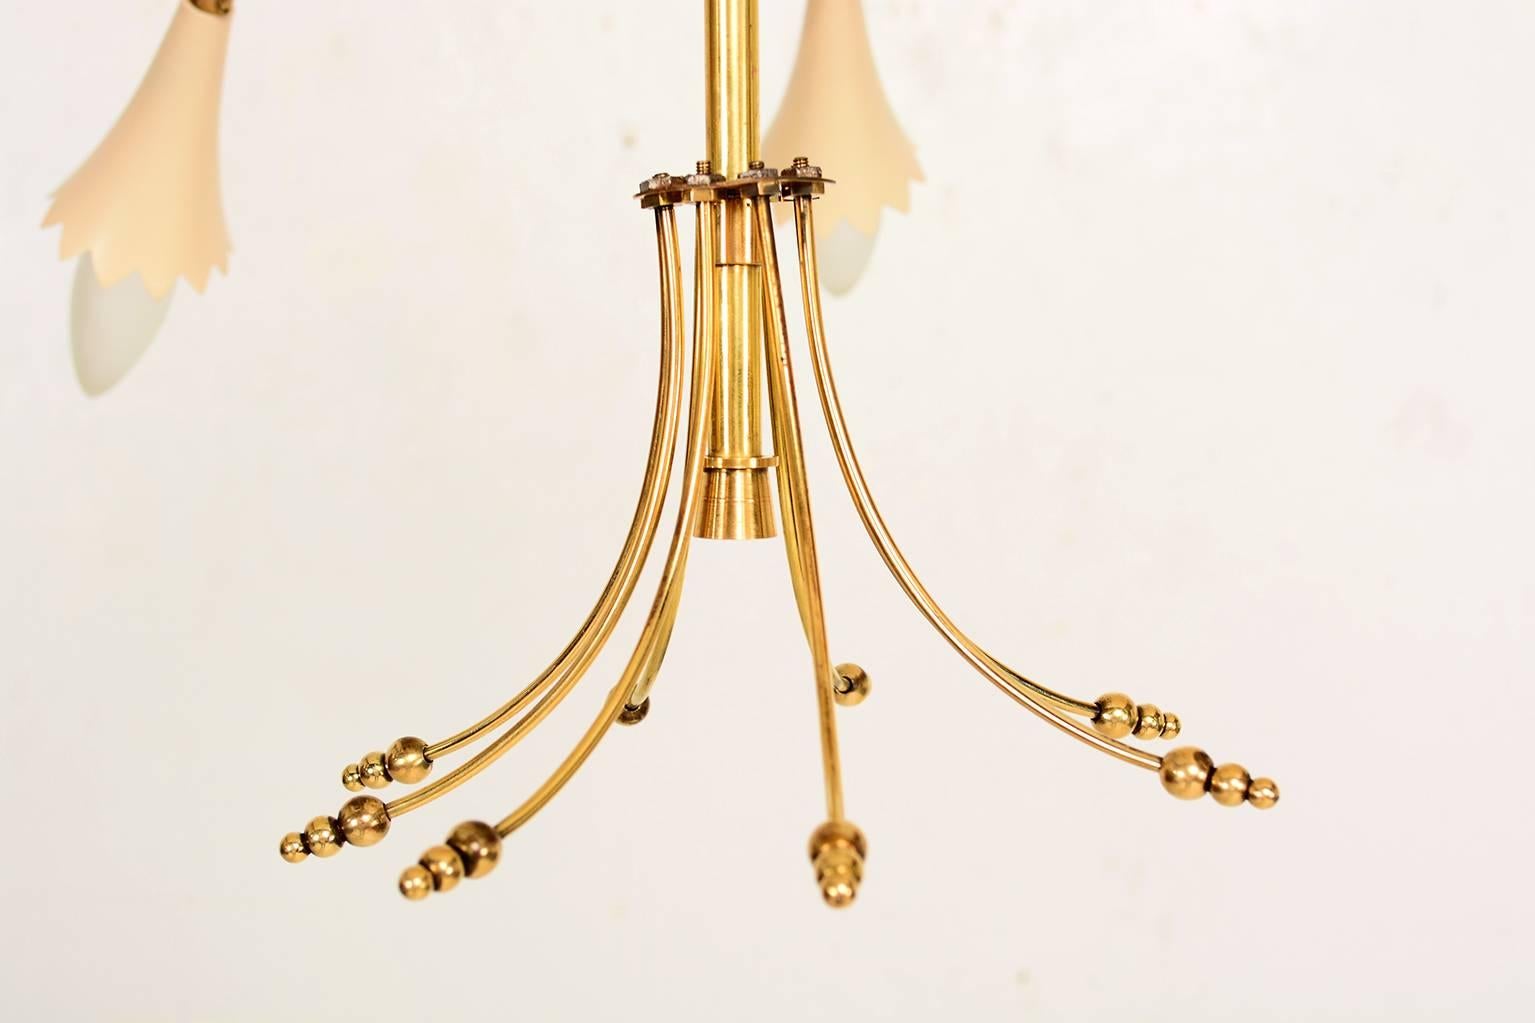 For your consideration a beautiful Italian chandelier constructed with brass and aluminum shades. 

Eight arms decorated with solid brass leaves accents, resembling a brach with a flower. 

Chandelier has been rewired and it is in excellent